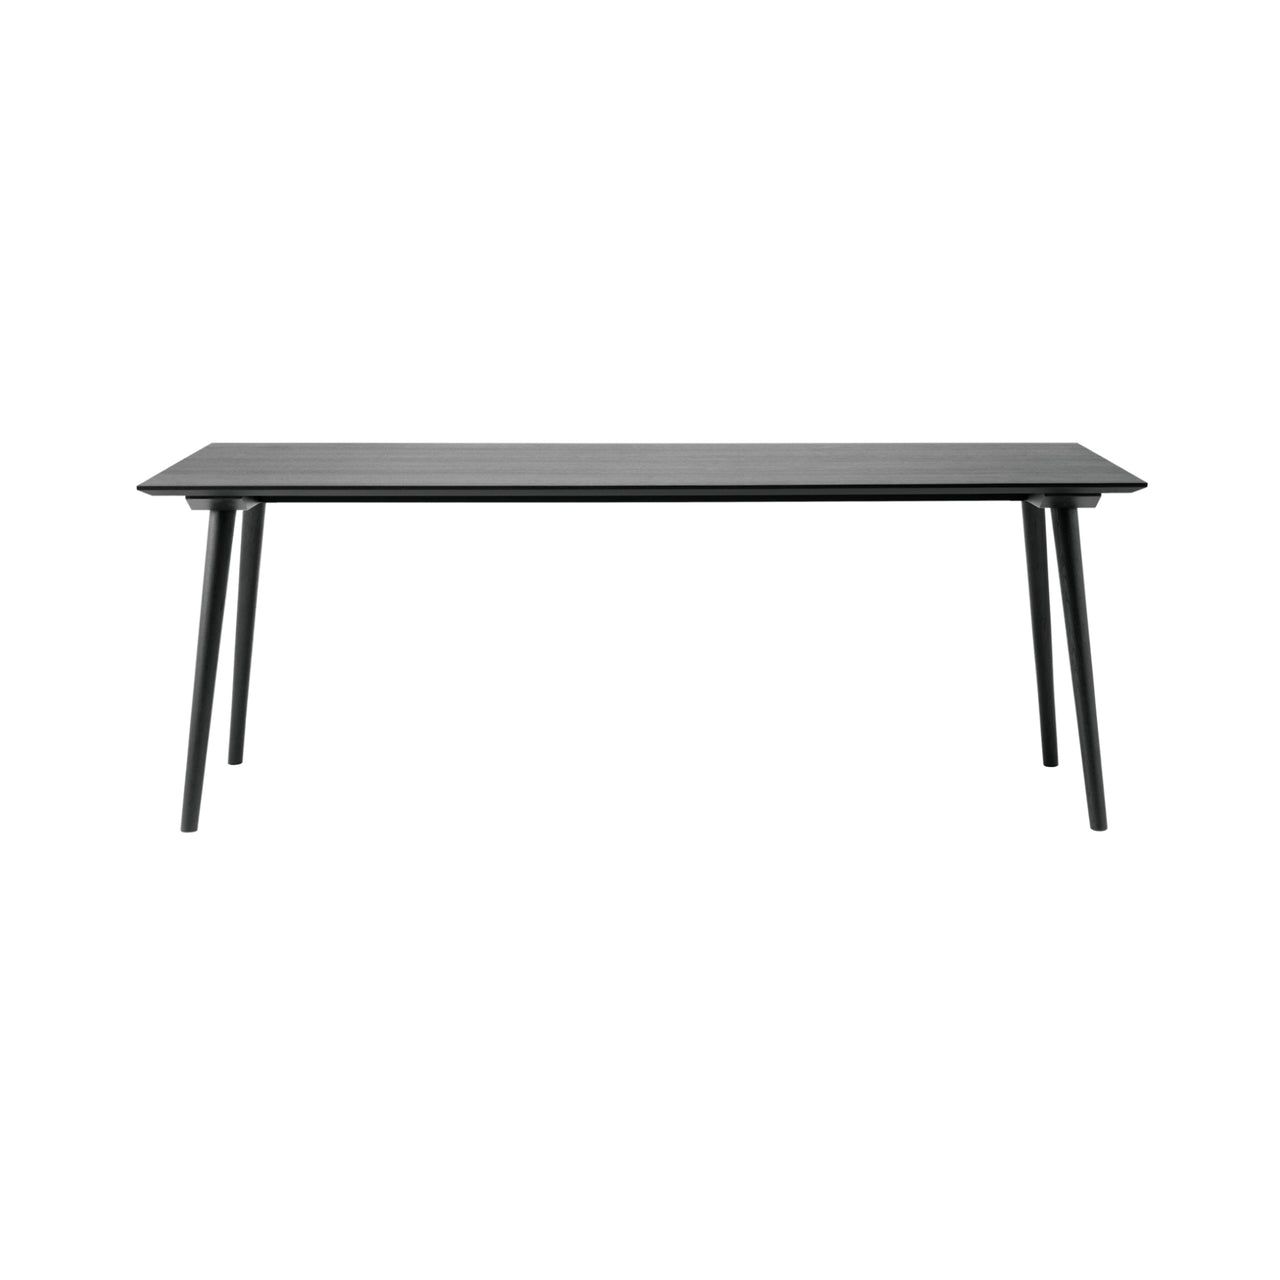 In Between Rectangular Dining Table SK5 + SK6: Small (SK5) - 78.7